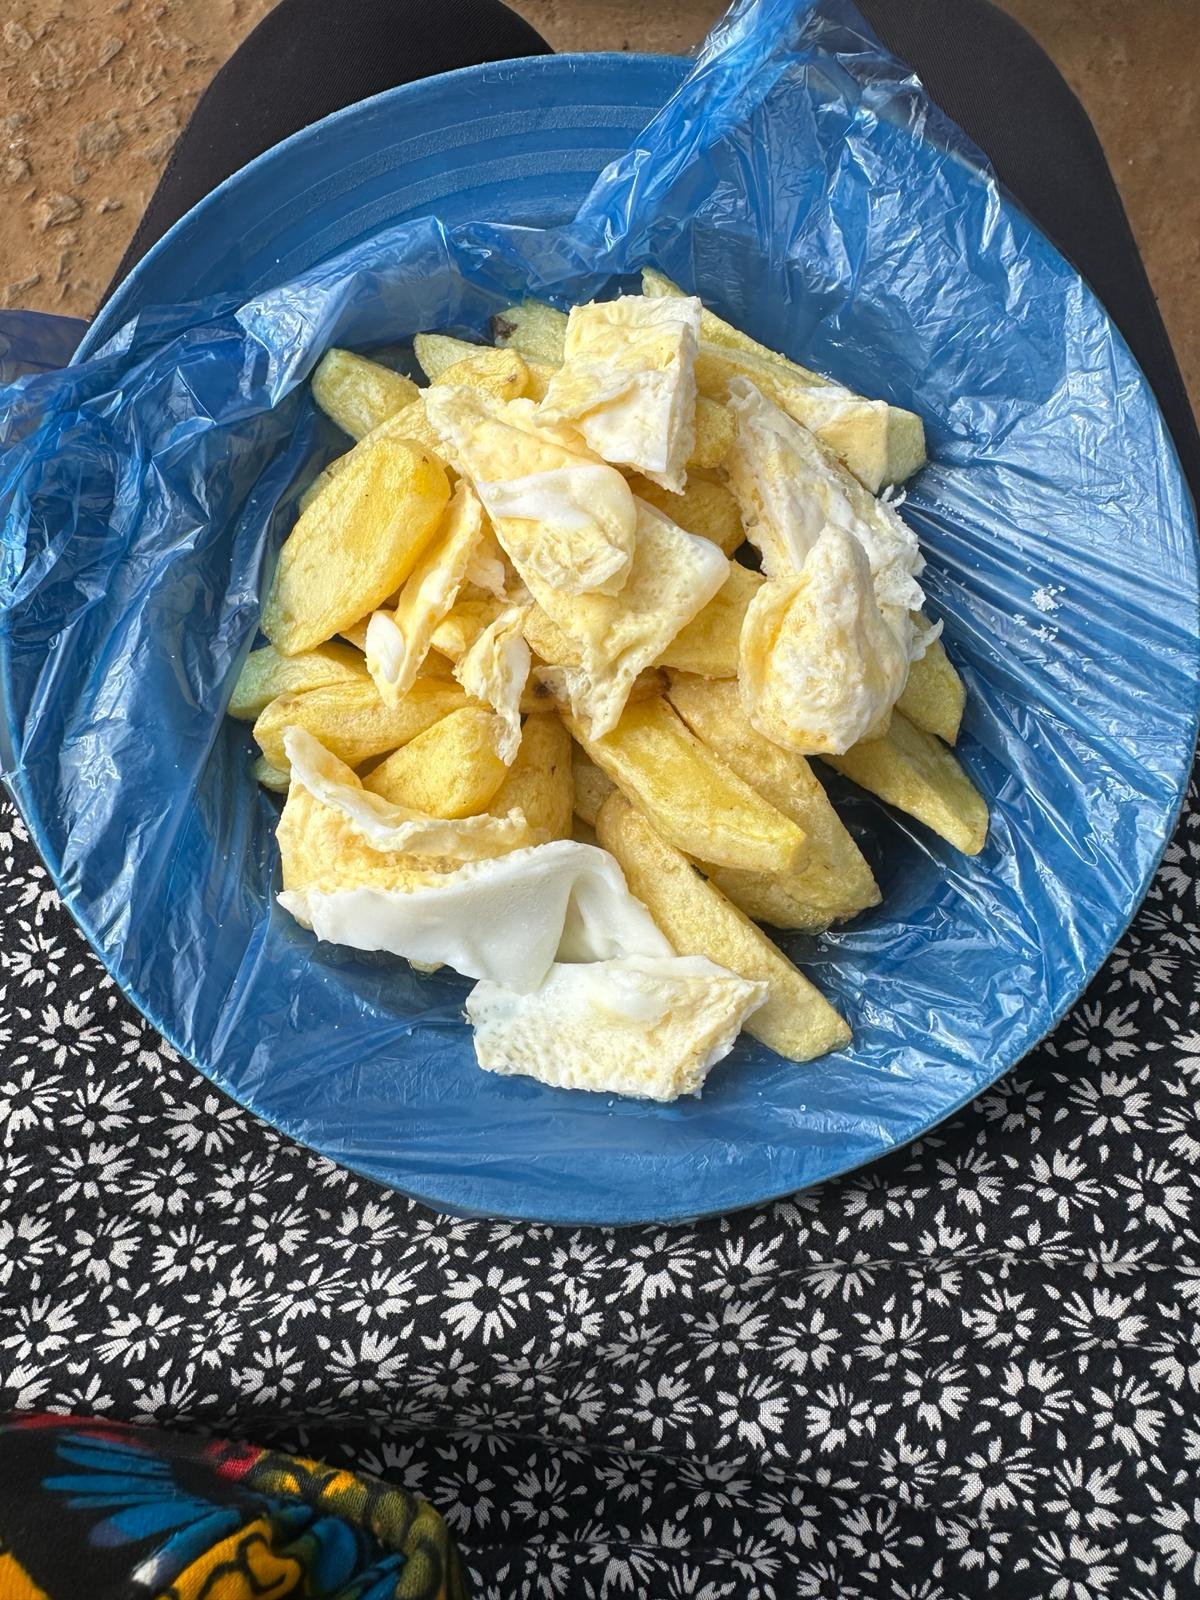 Chips and eggs 2.jpg